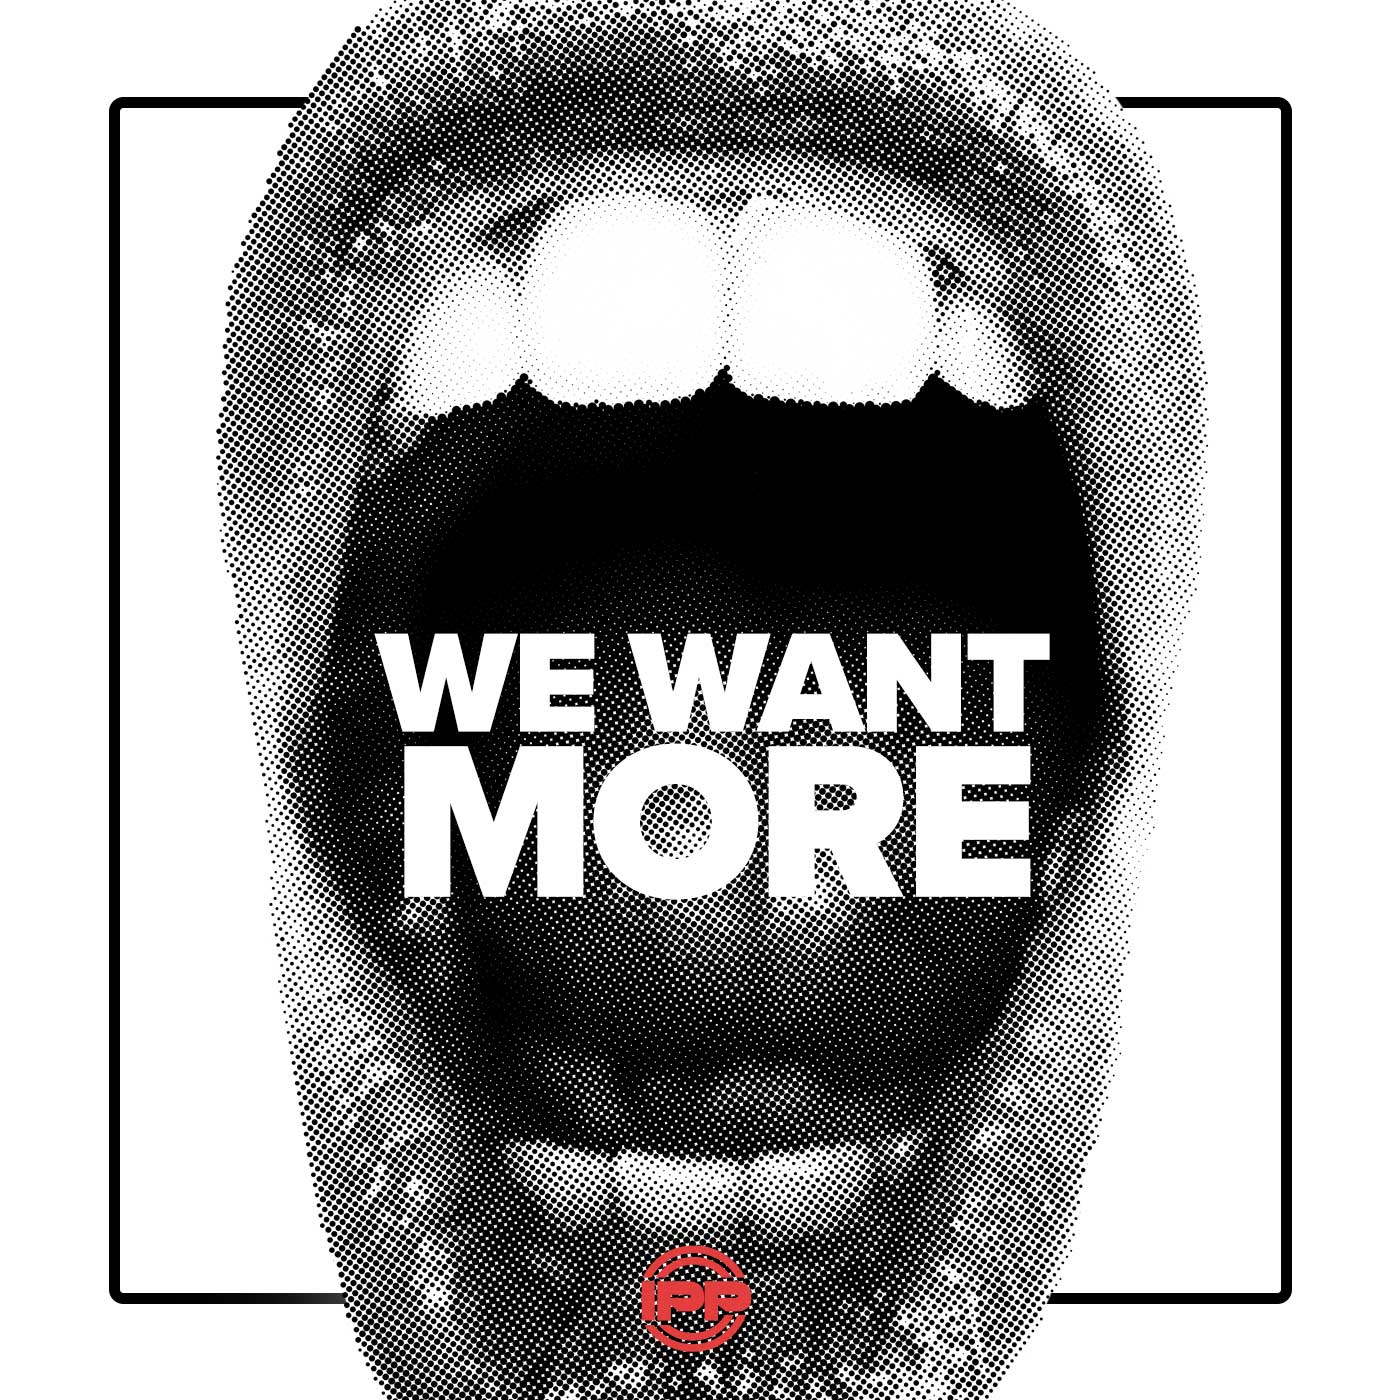 Premade Cheer Mix – We Want More [2:30] - We-Want-Morer-Premade-Cheer-Music-2022